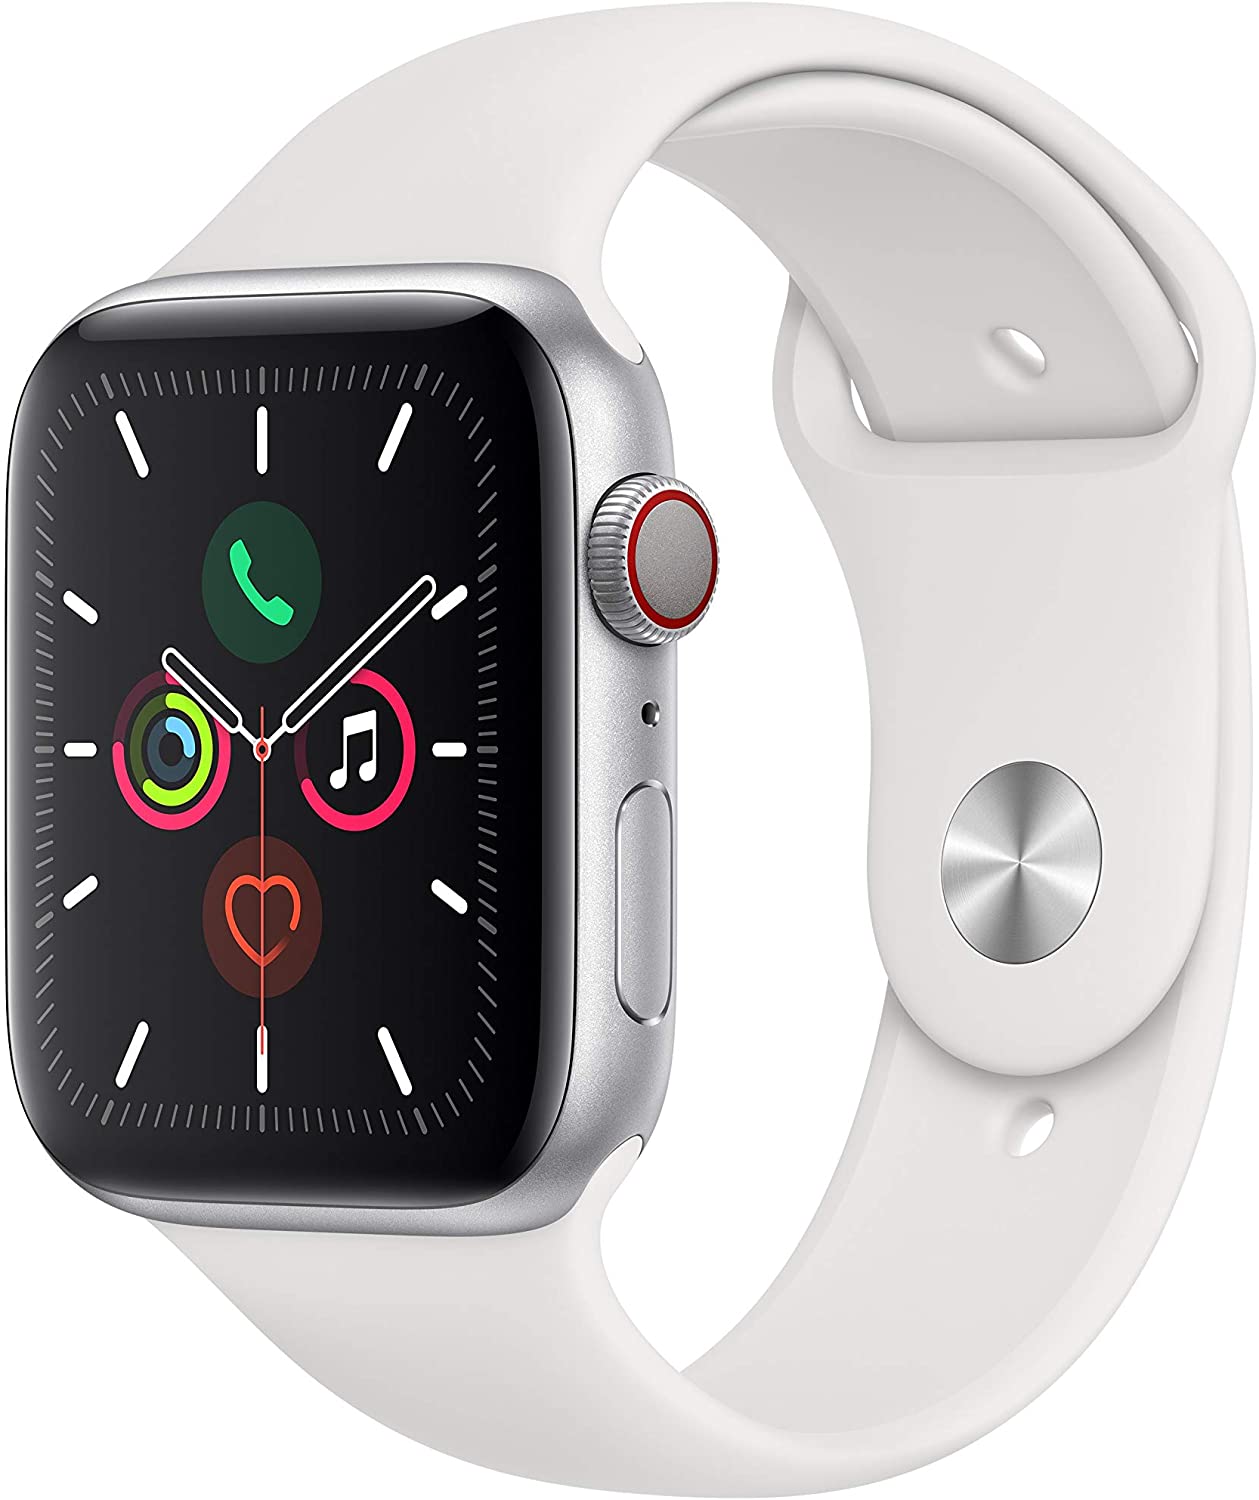 Apple Watch Series 5 (GPS + Cellular, 44mm) - Silver Aluminum Case with White Sport Band